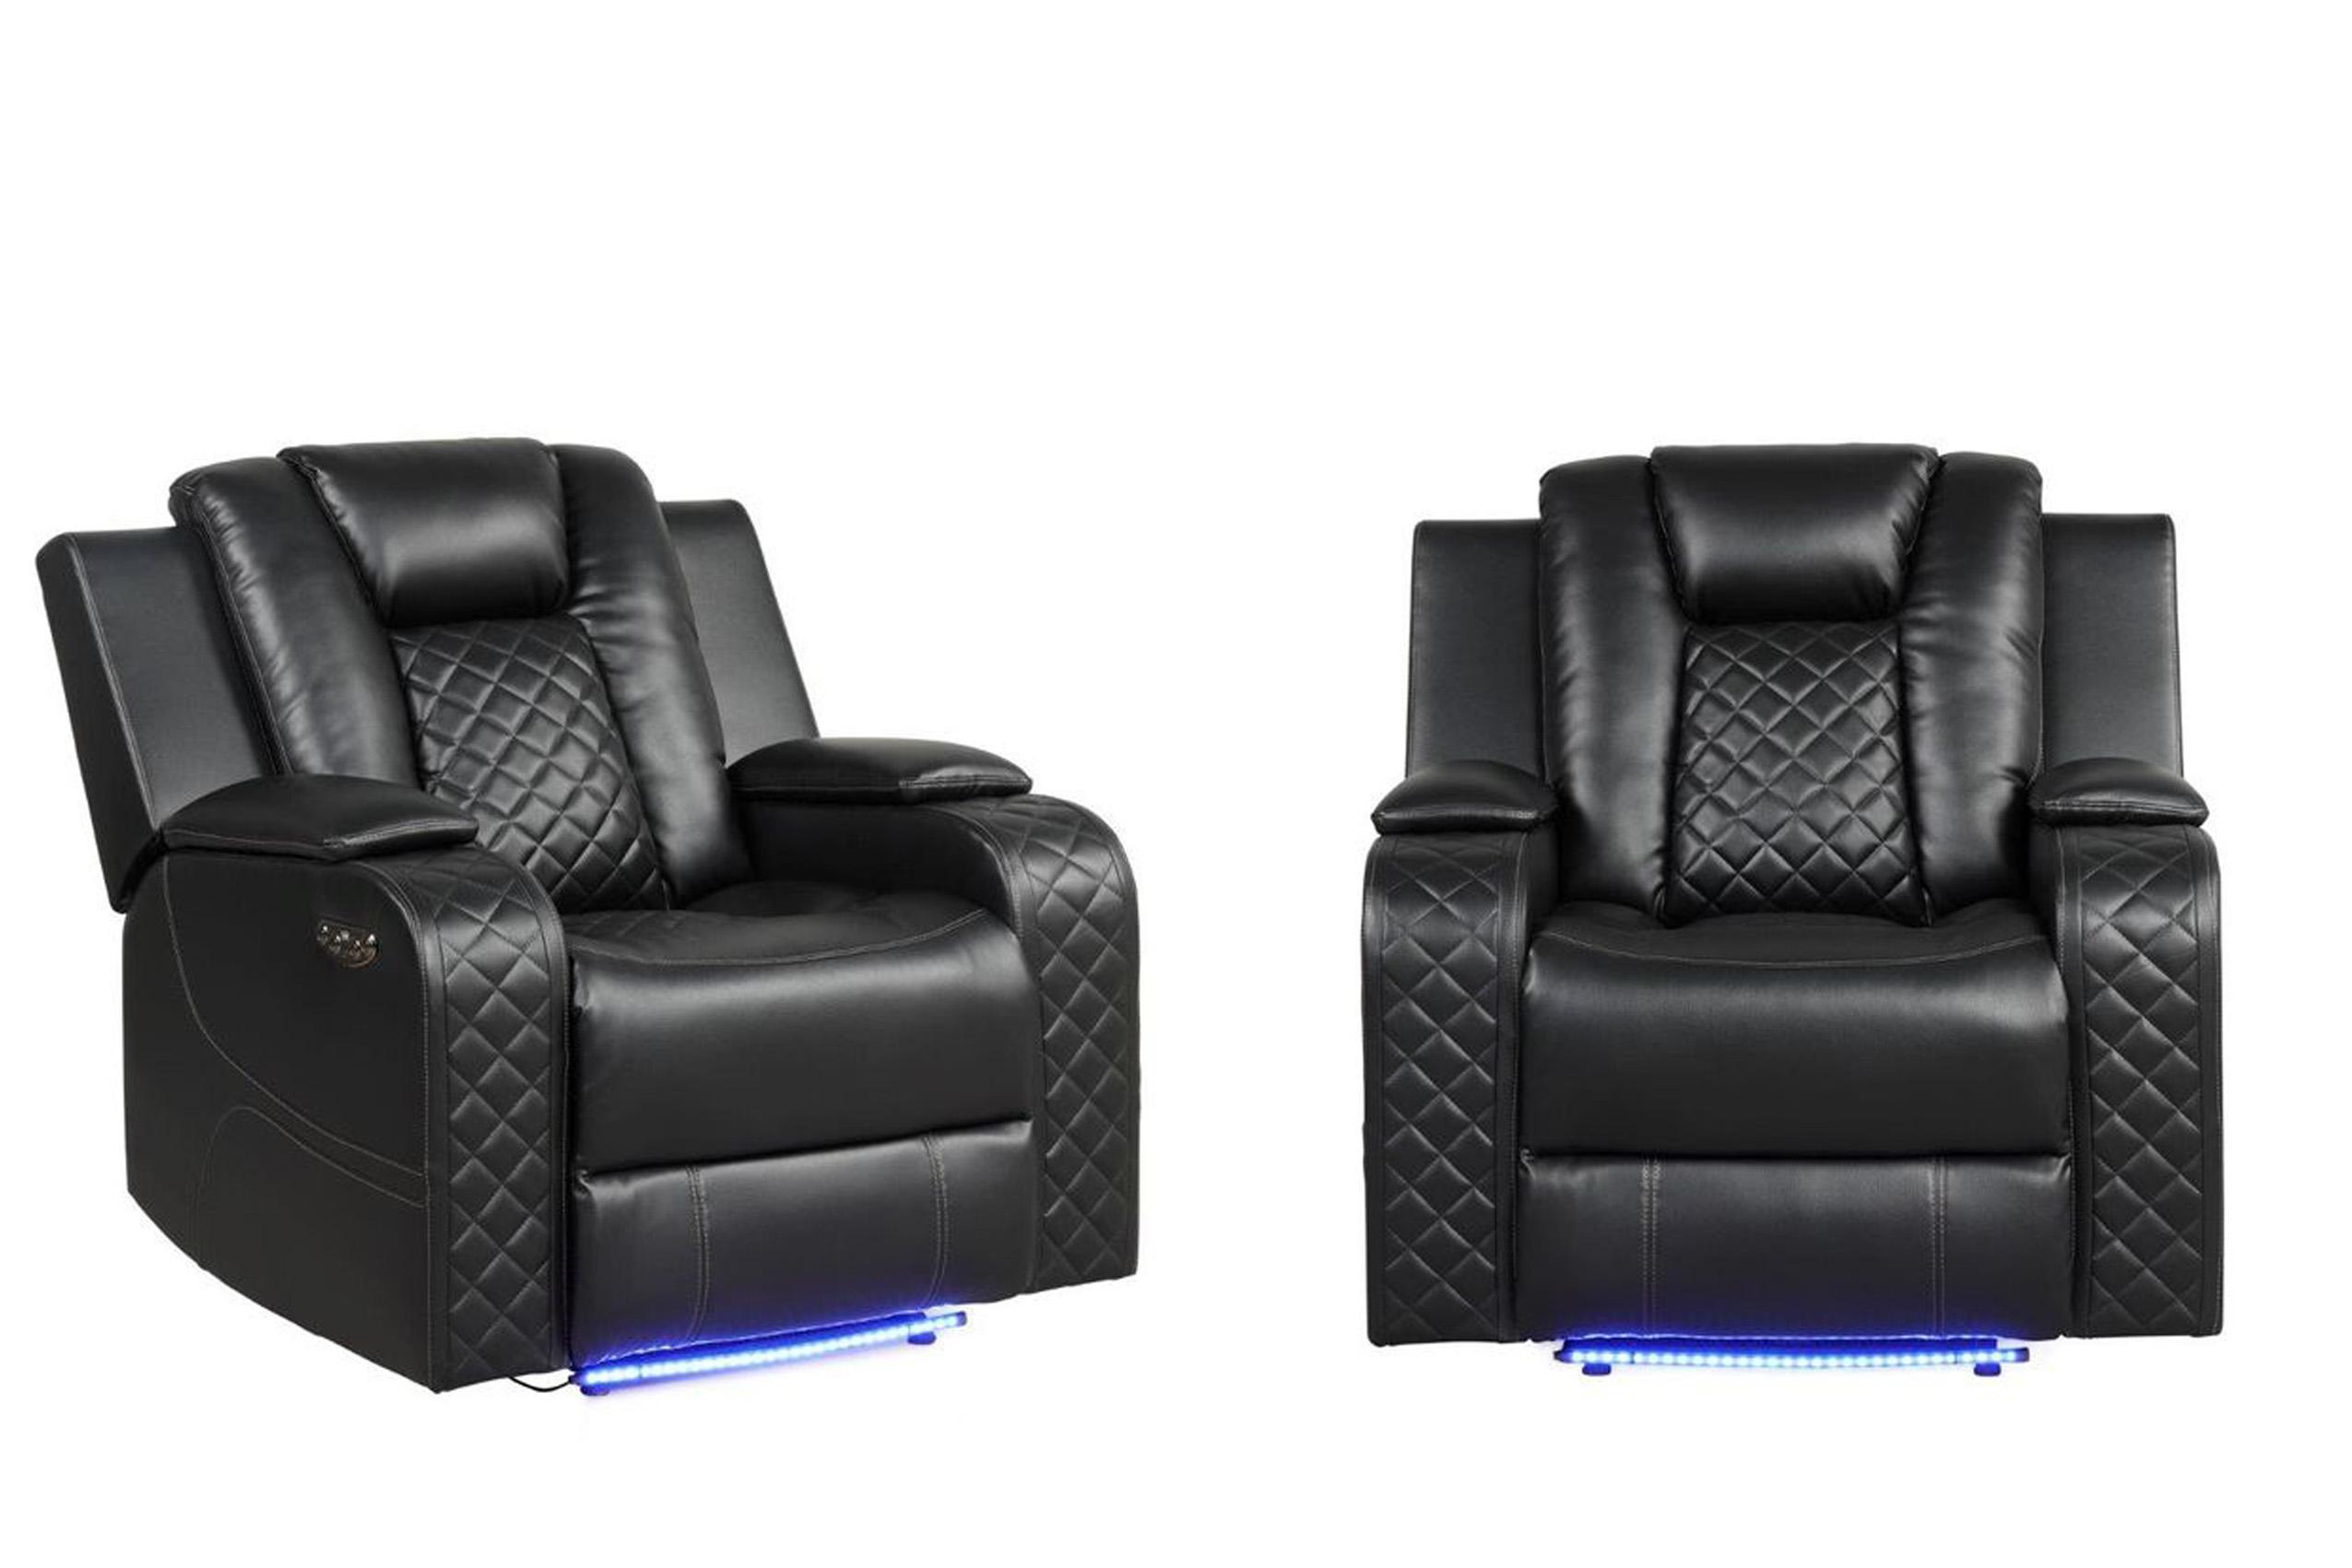 Contemporary, Modern Recliner Chair Set BENZ Black BENZ-BK-CH-2PC in Black Faux Leather